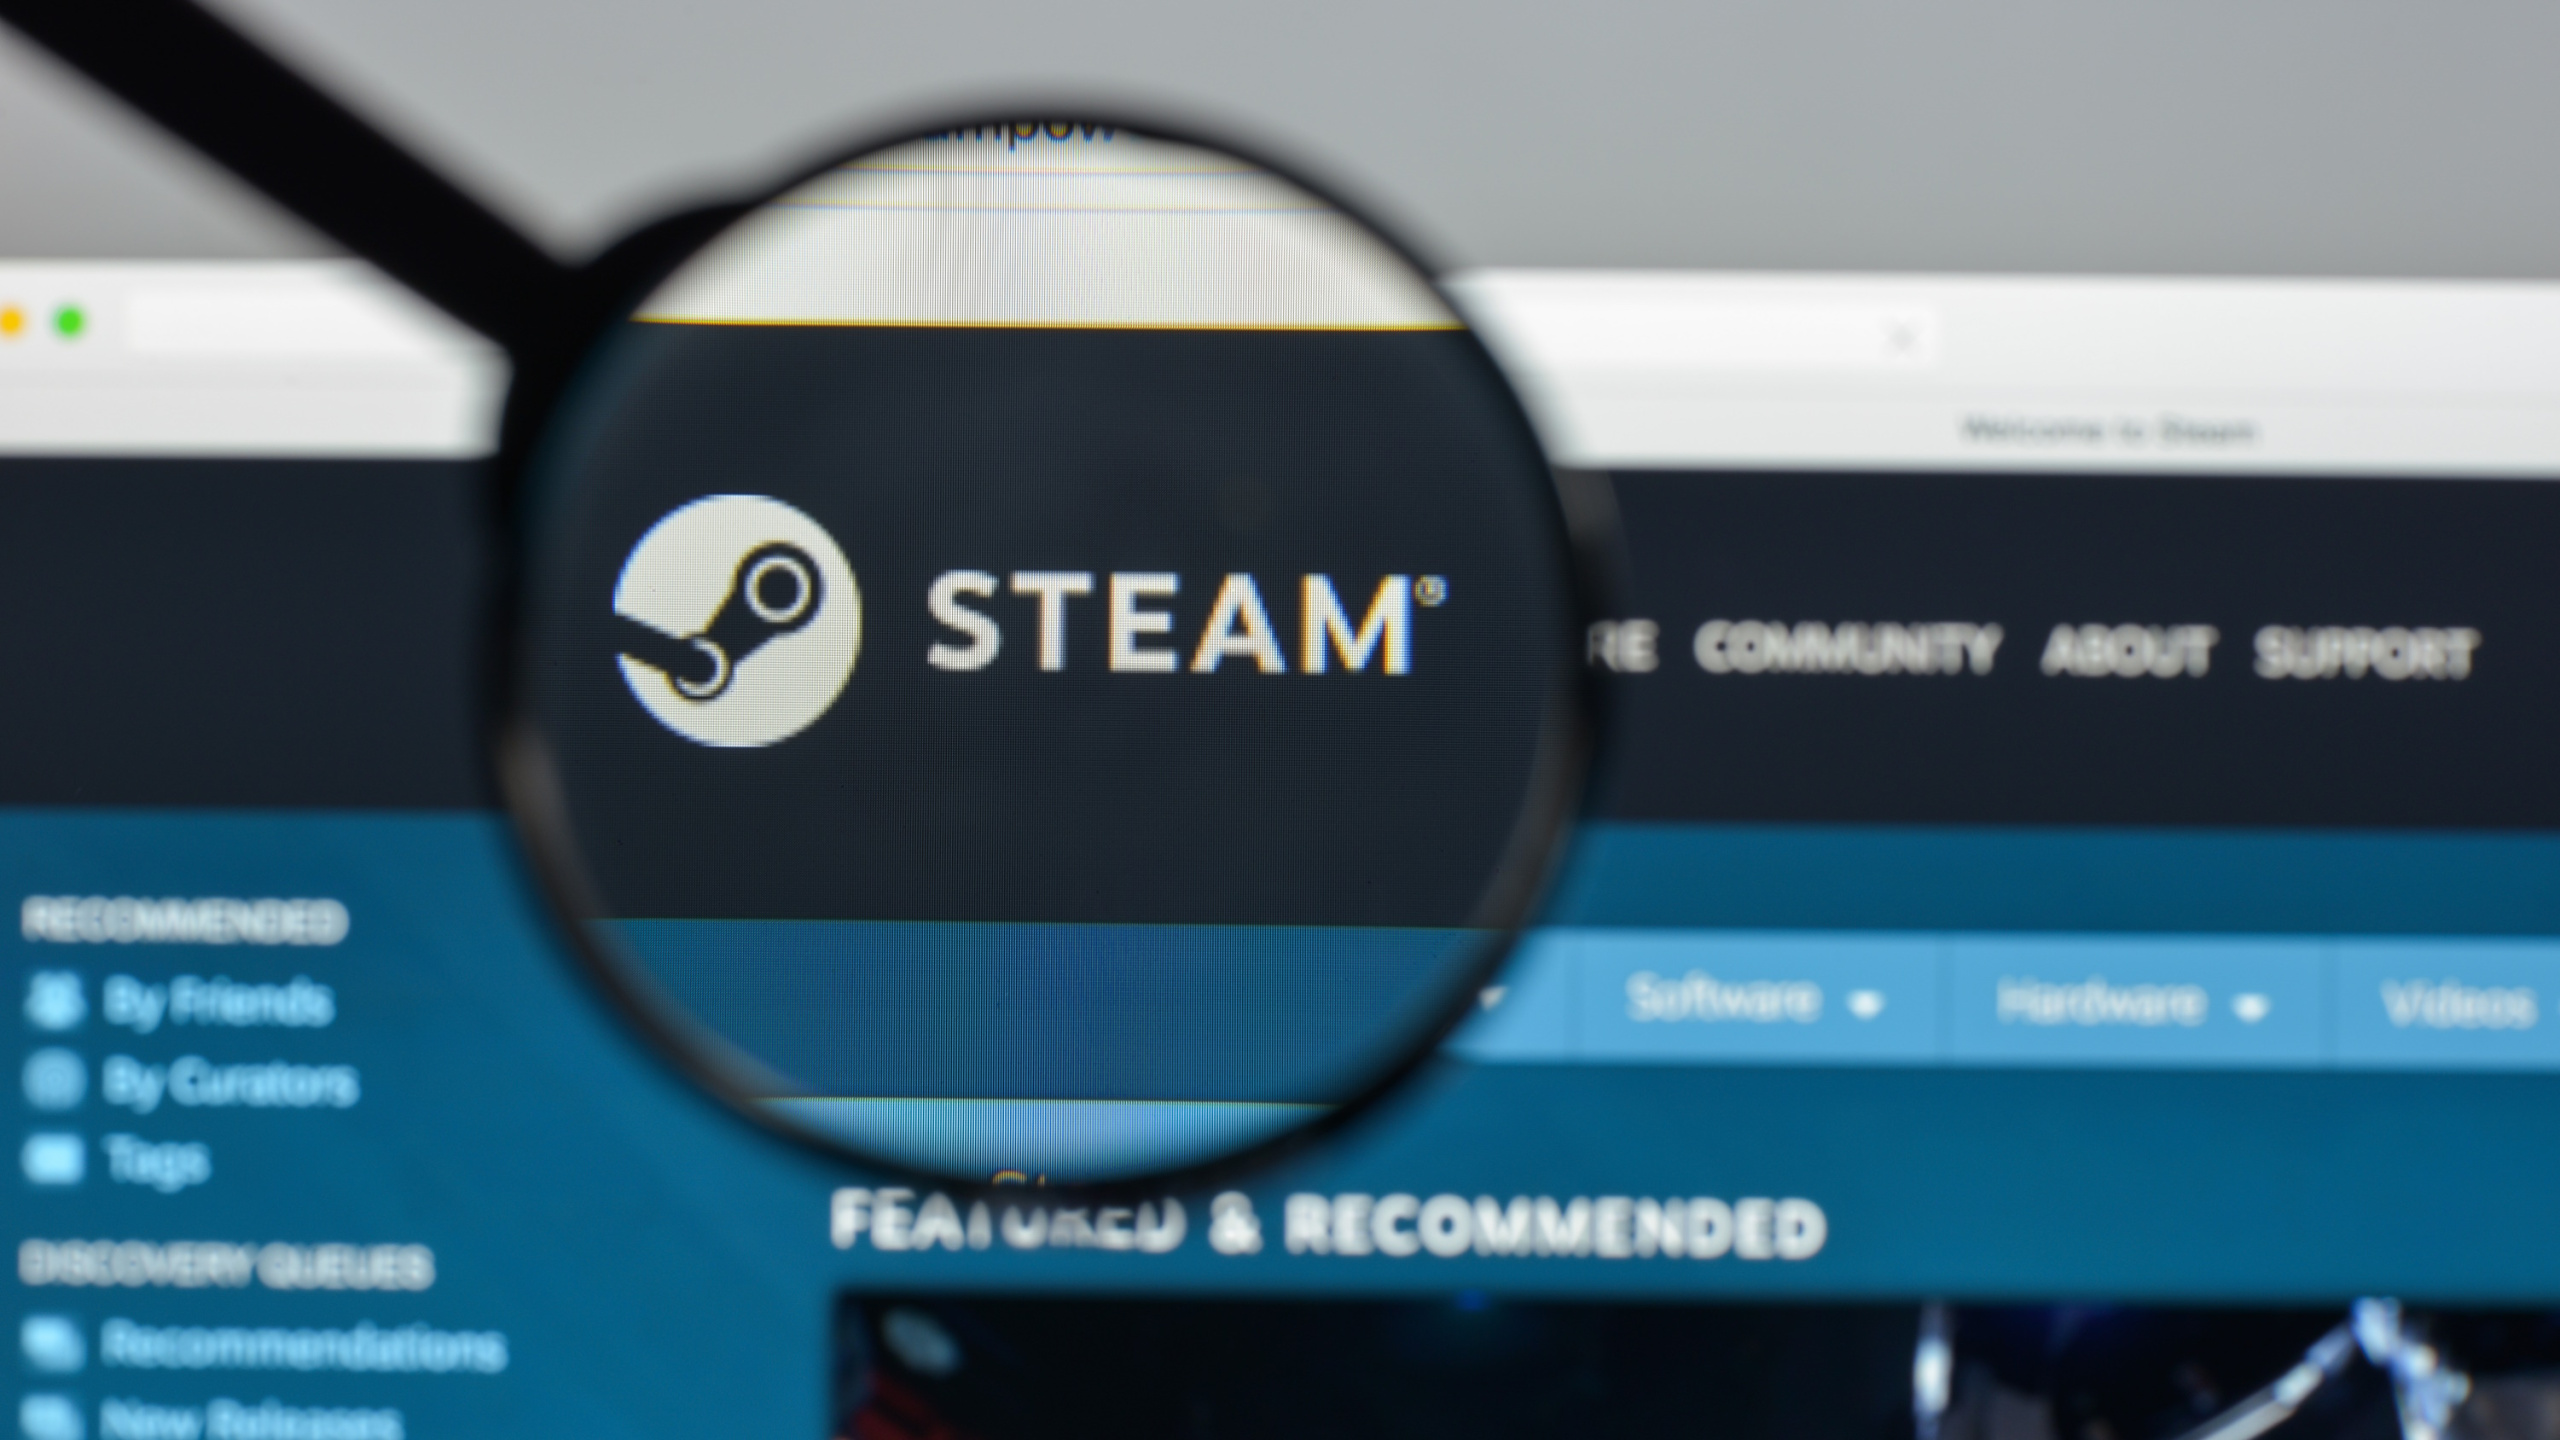 Playing Steam PC games on Android devices using Steam Link: A Comprehensive Guide